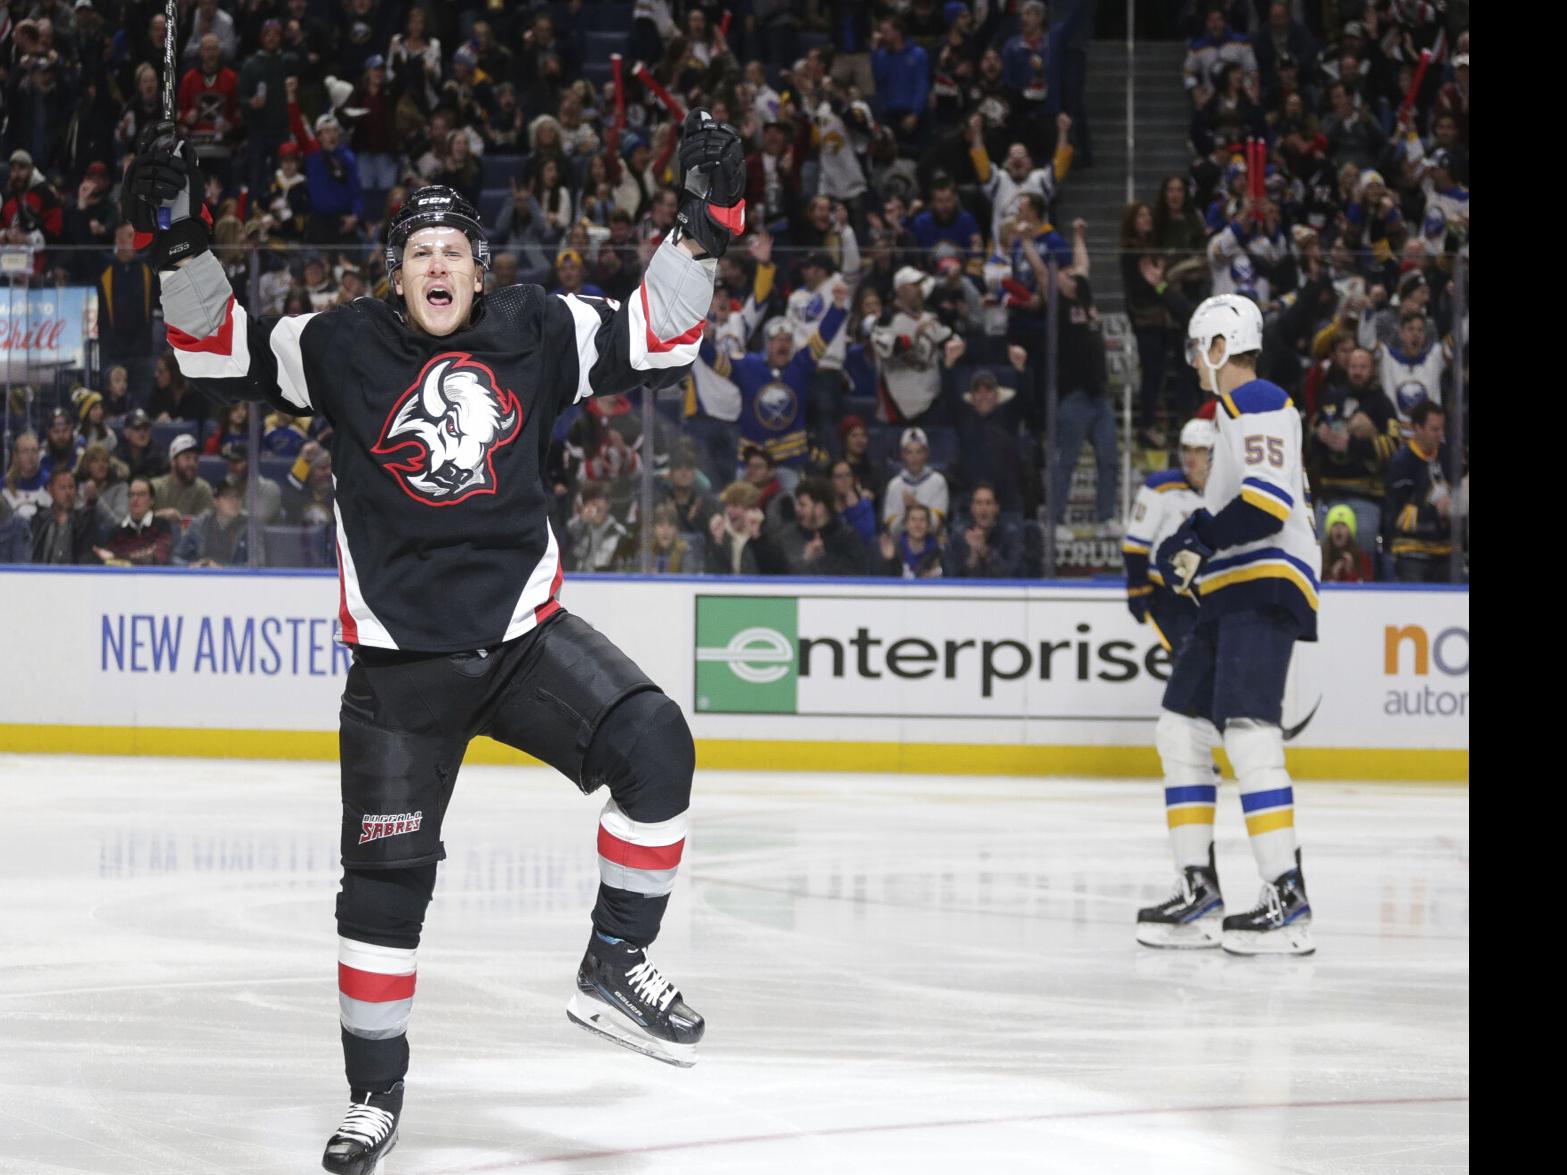 Sabres to raffle off black and red goat head jersey